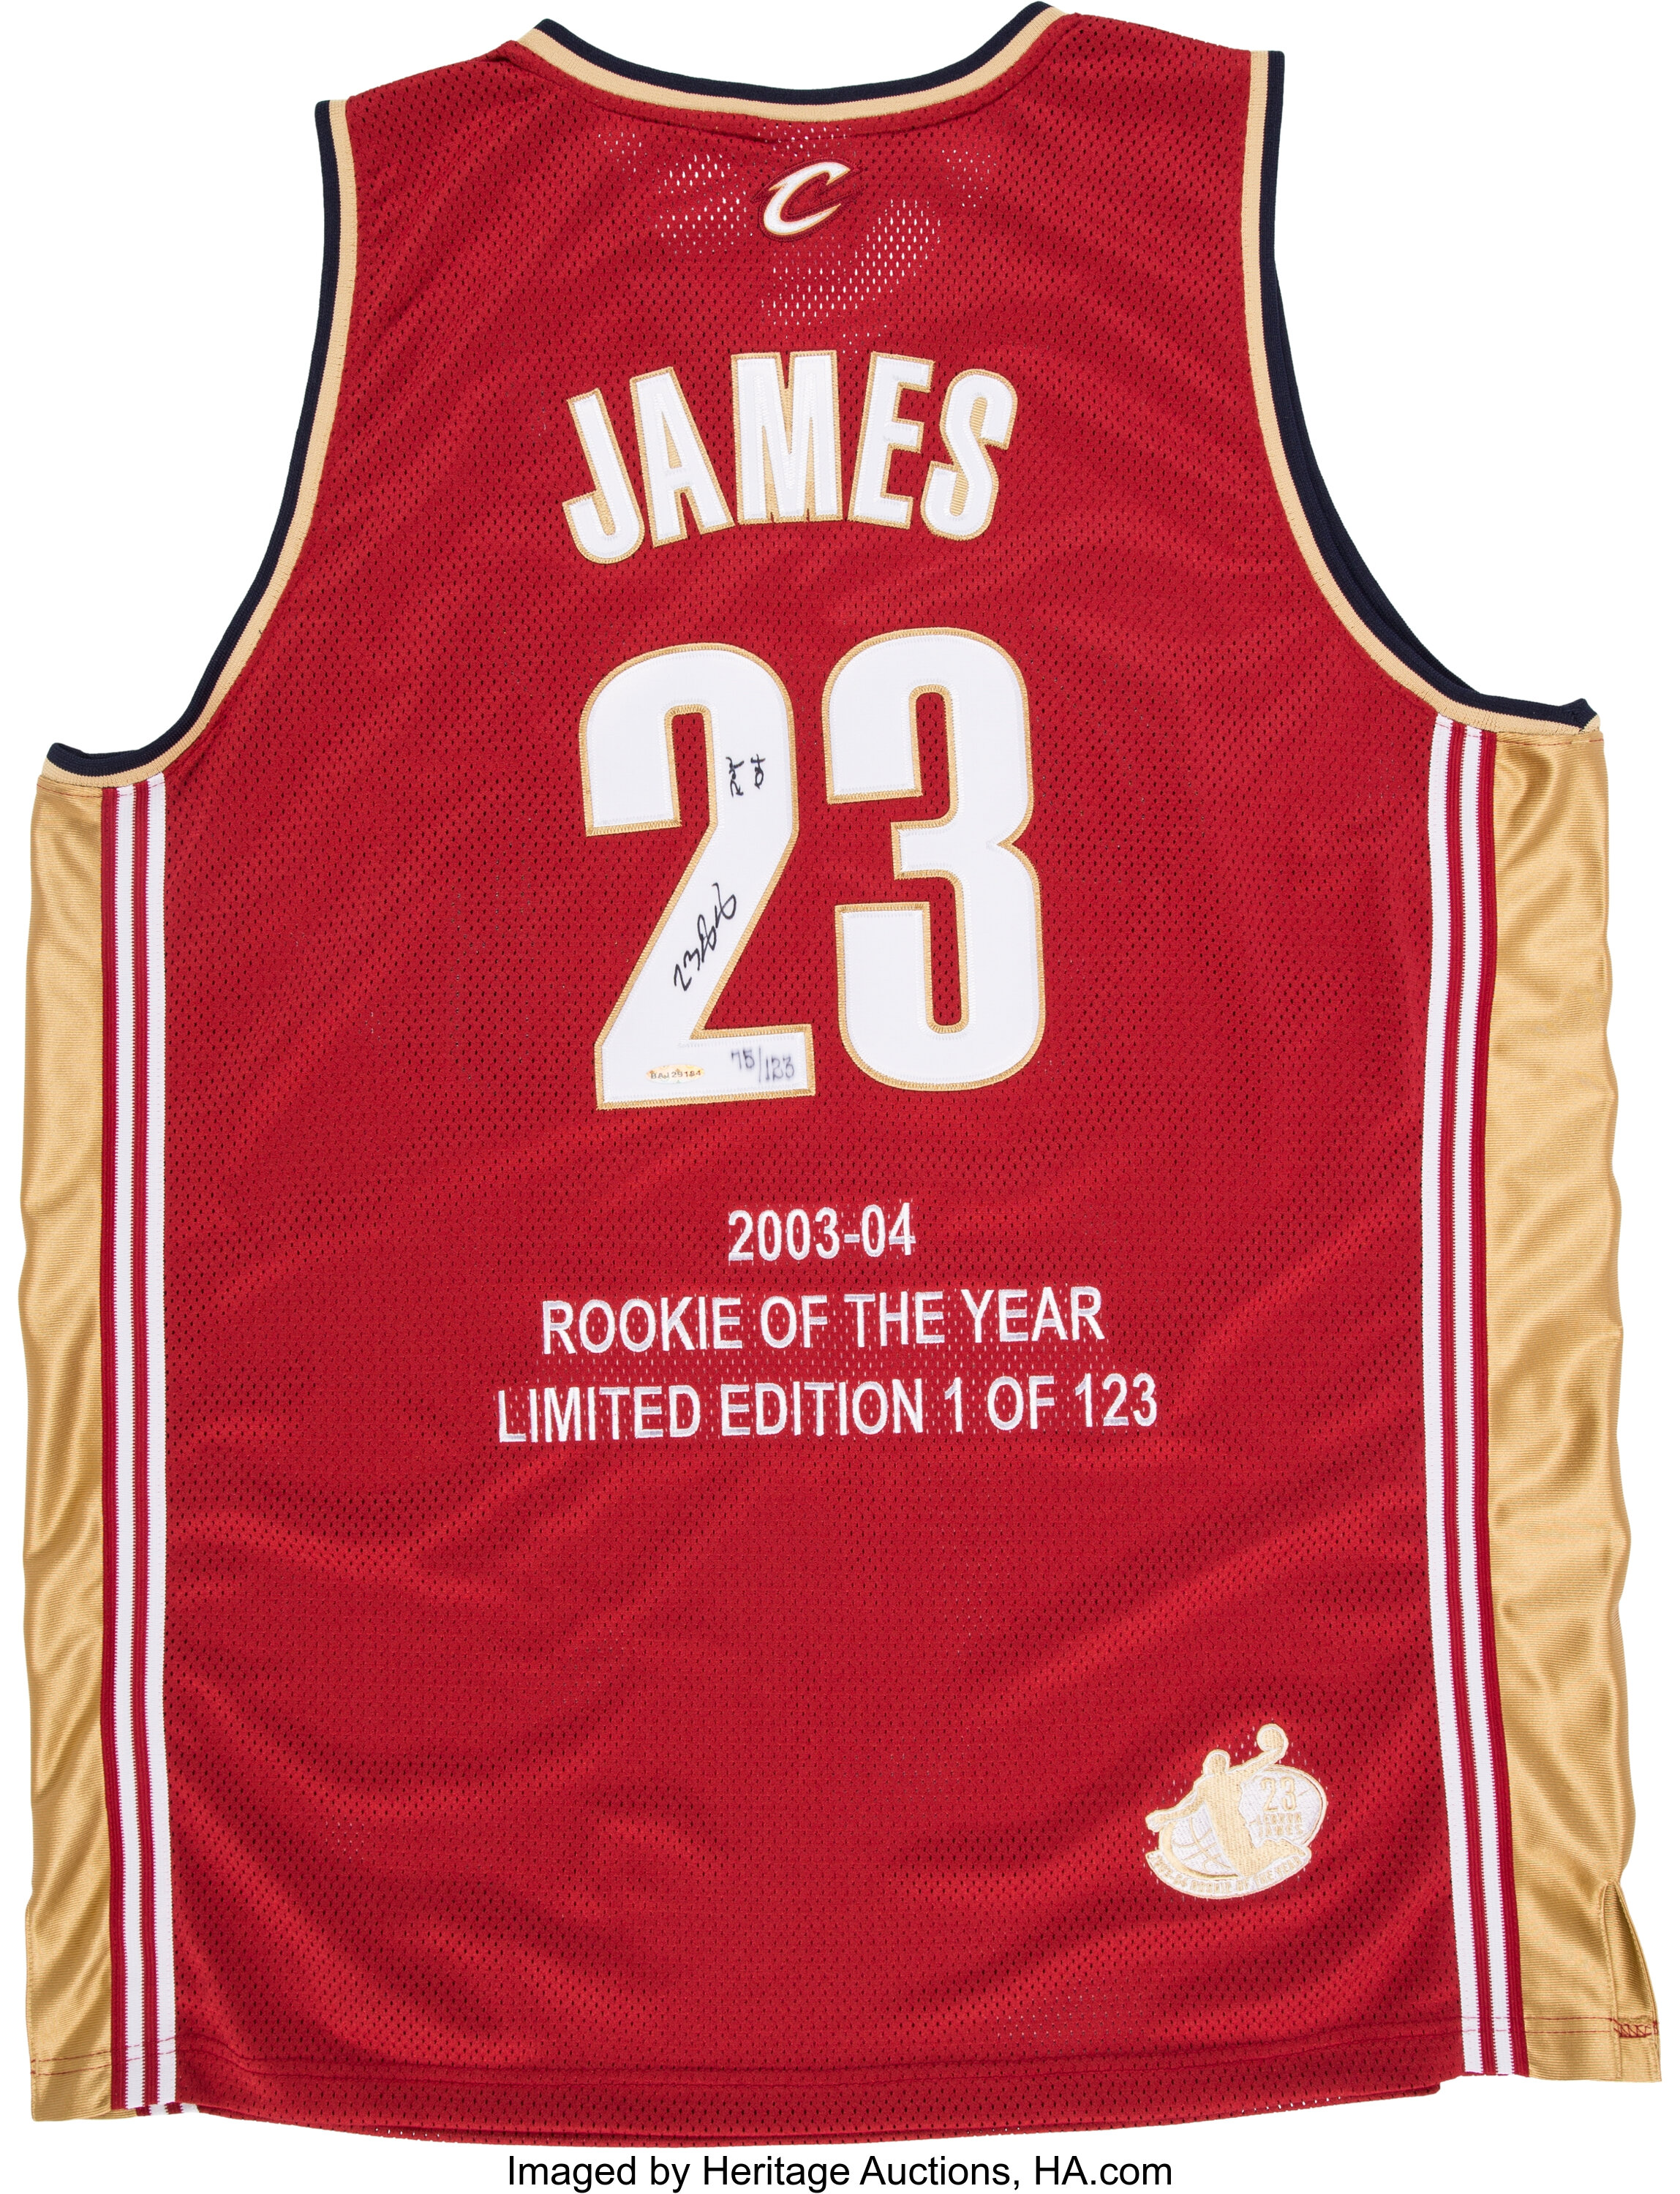 Lebron James' Official 2003 Cleveland Cavaliers Signed Jersey - CharityStars